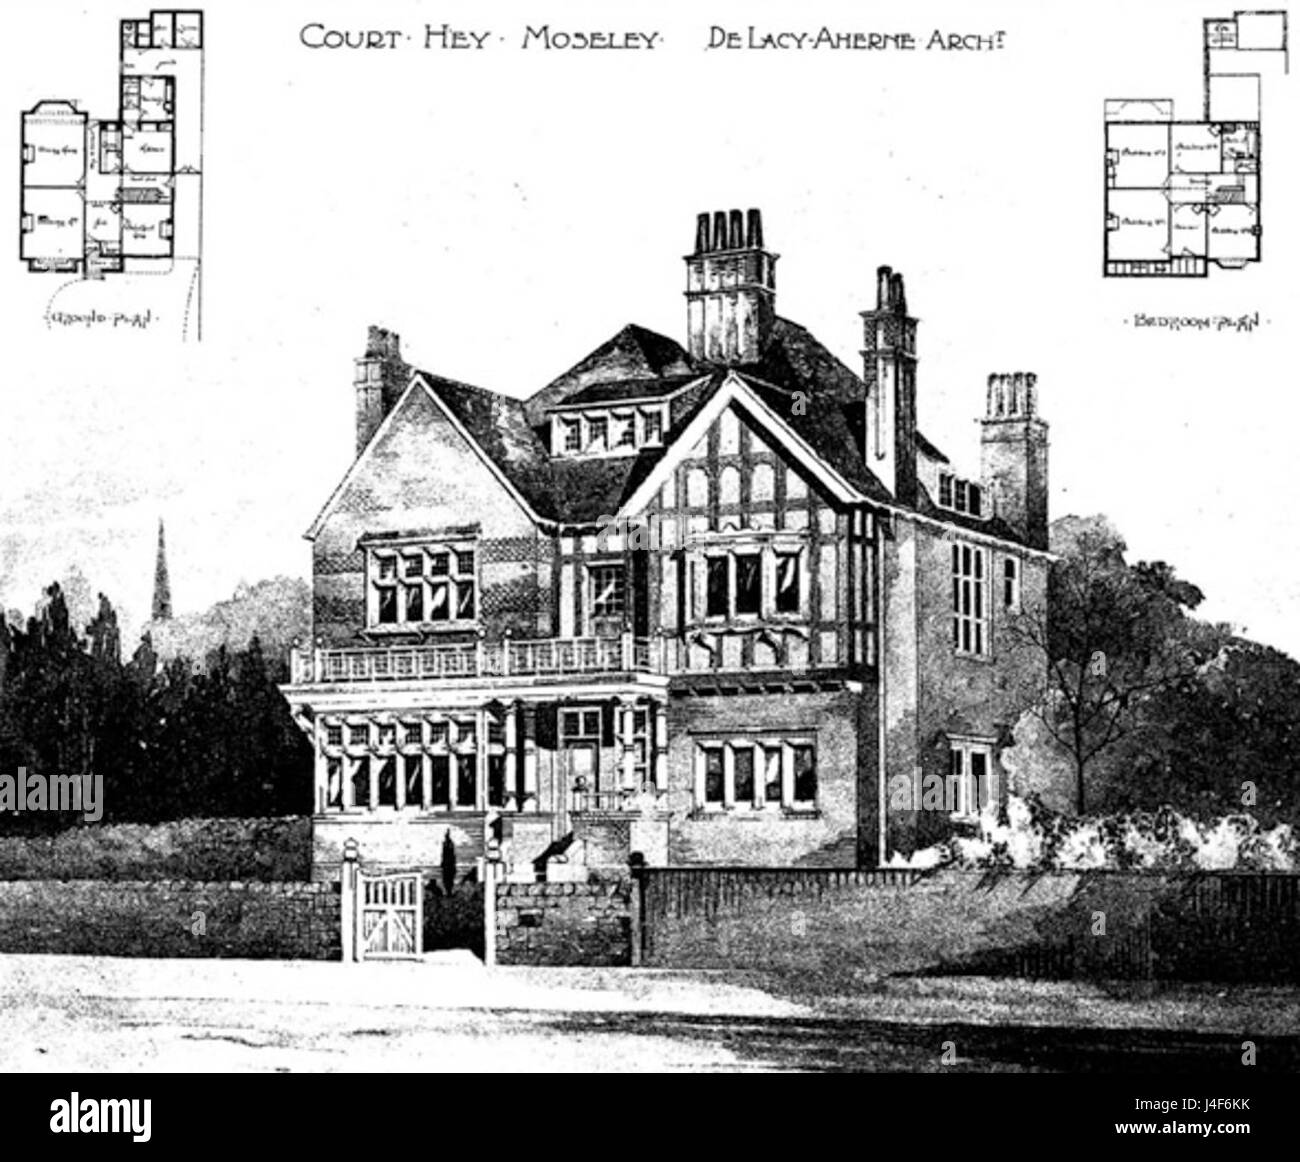 Court Hey  Moseley   William De Lacy Aherne Stock Photo